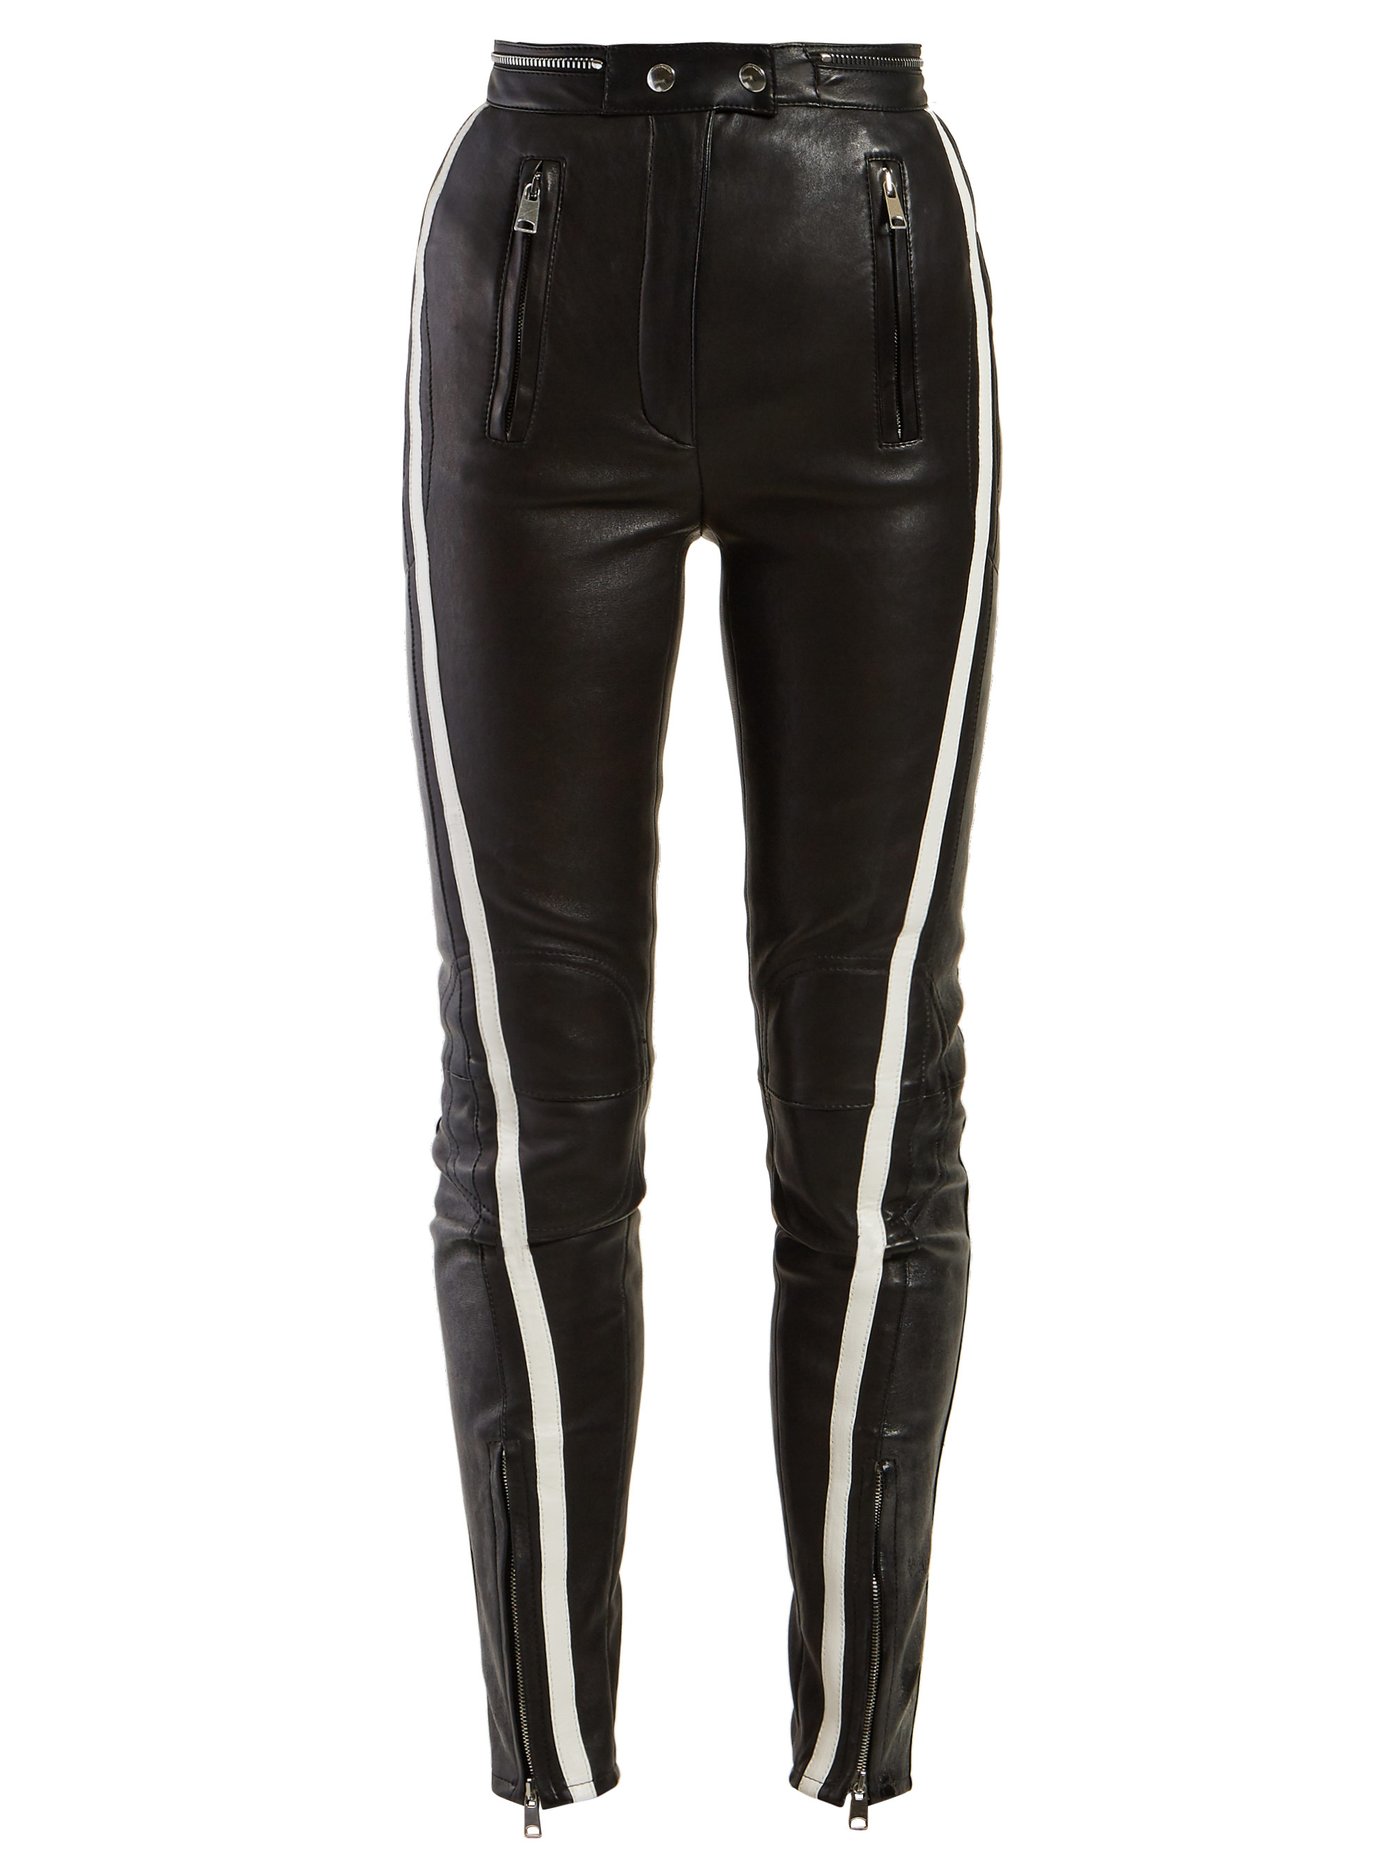 black pants with leather stripe on side